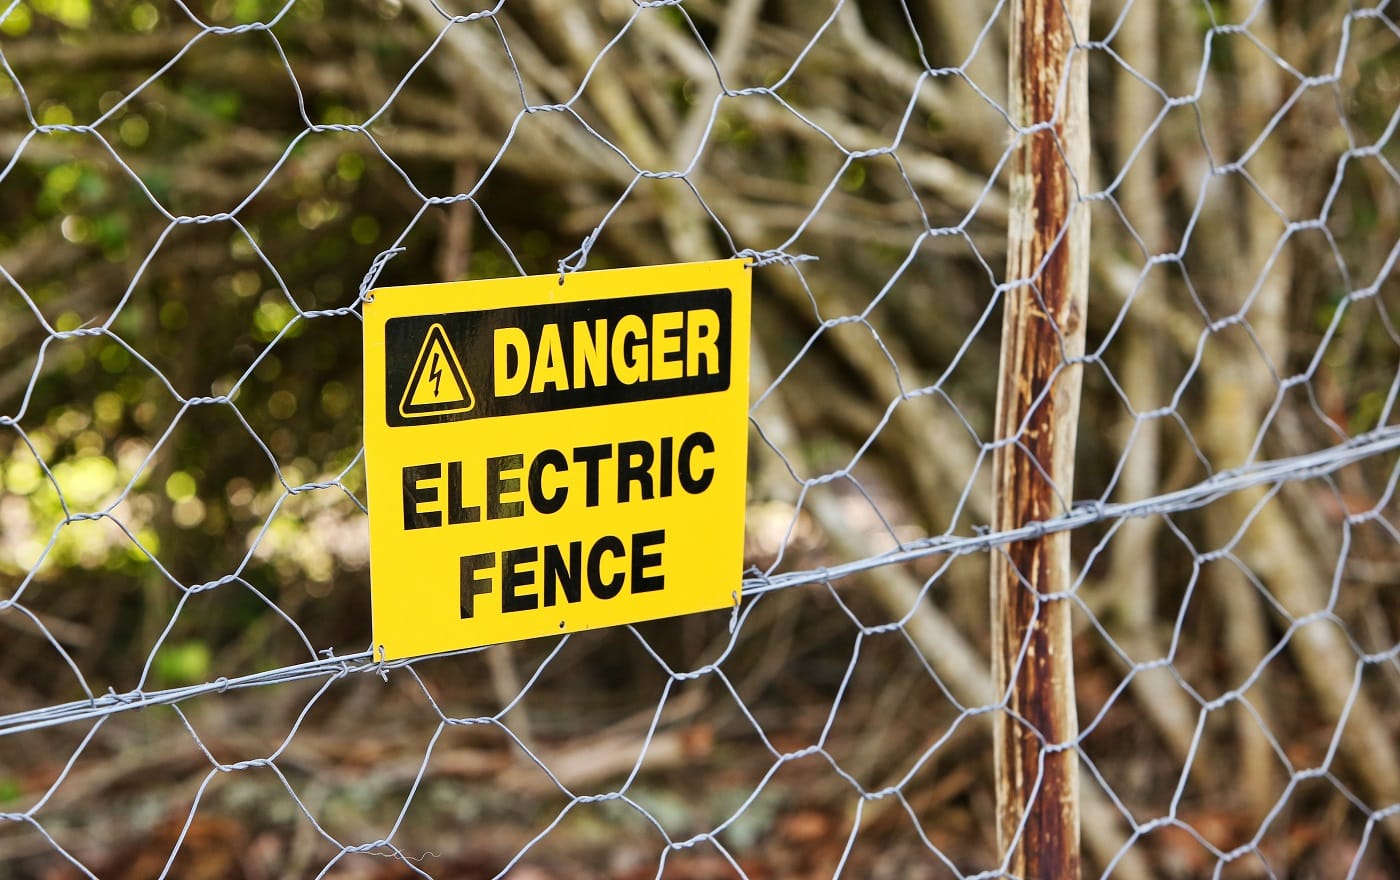 A danger sign hung from the electric fence with the trees in the background